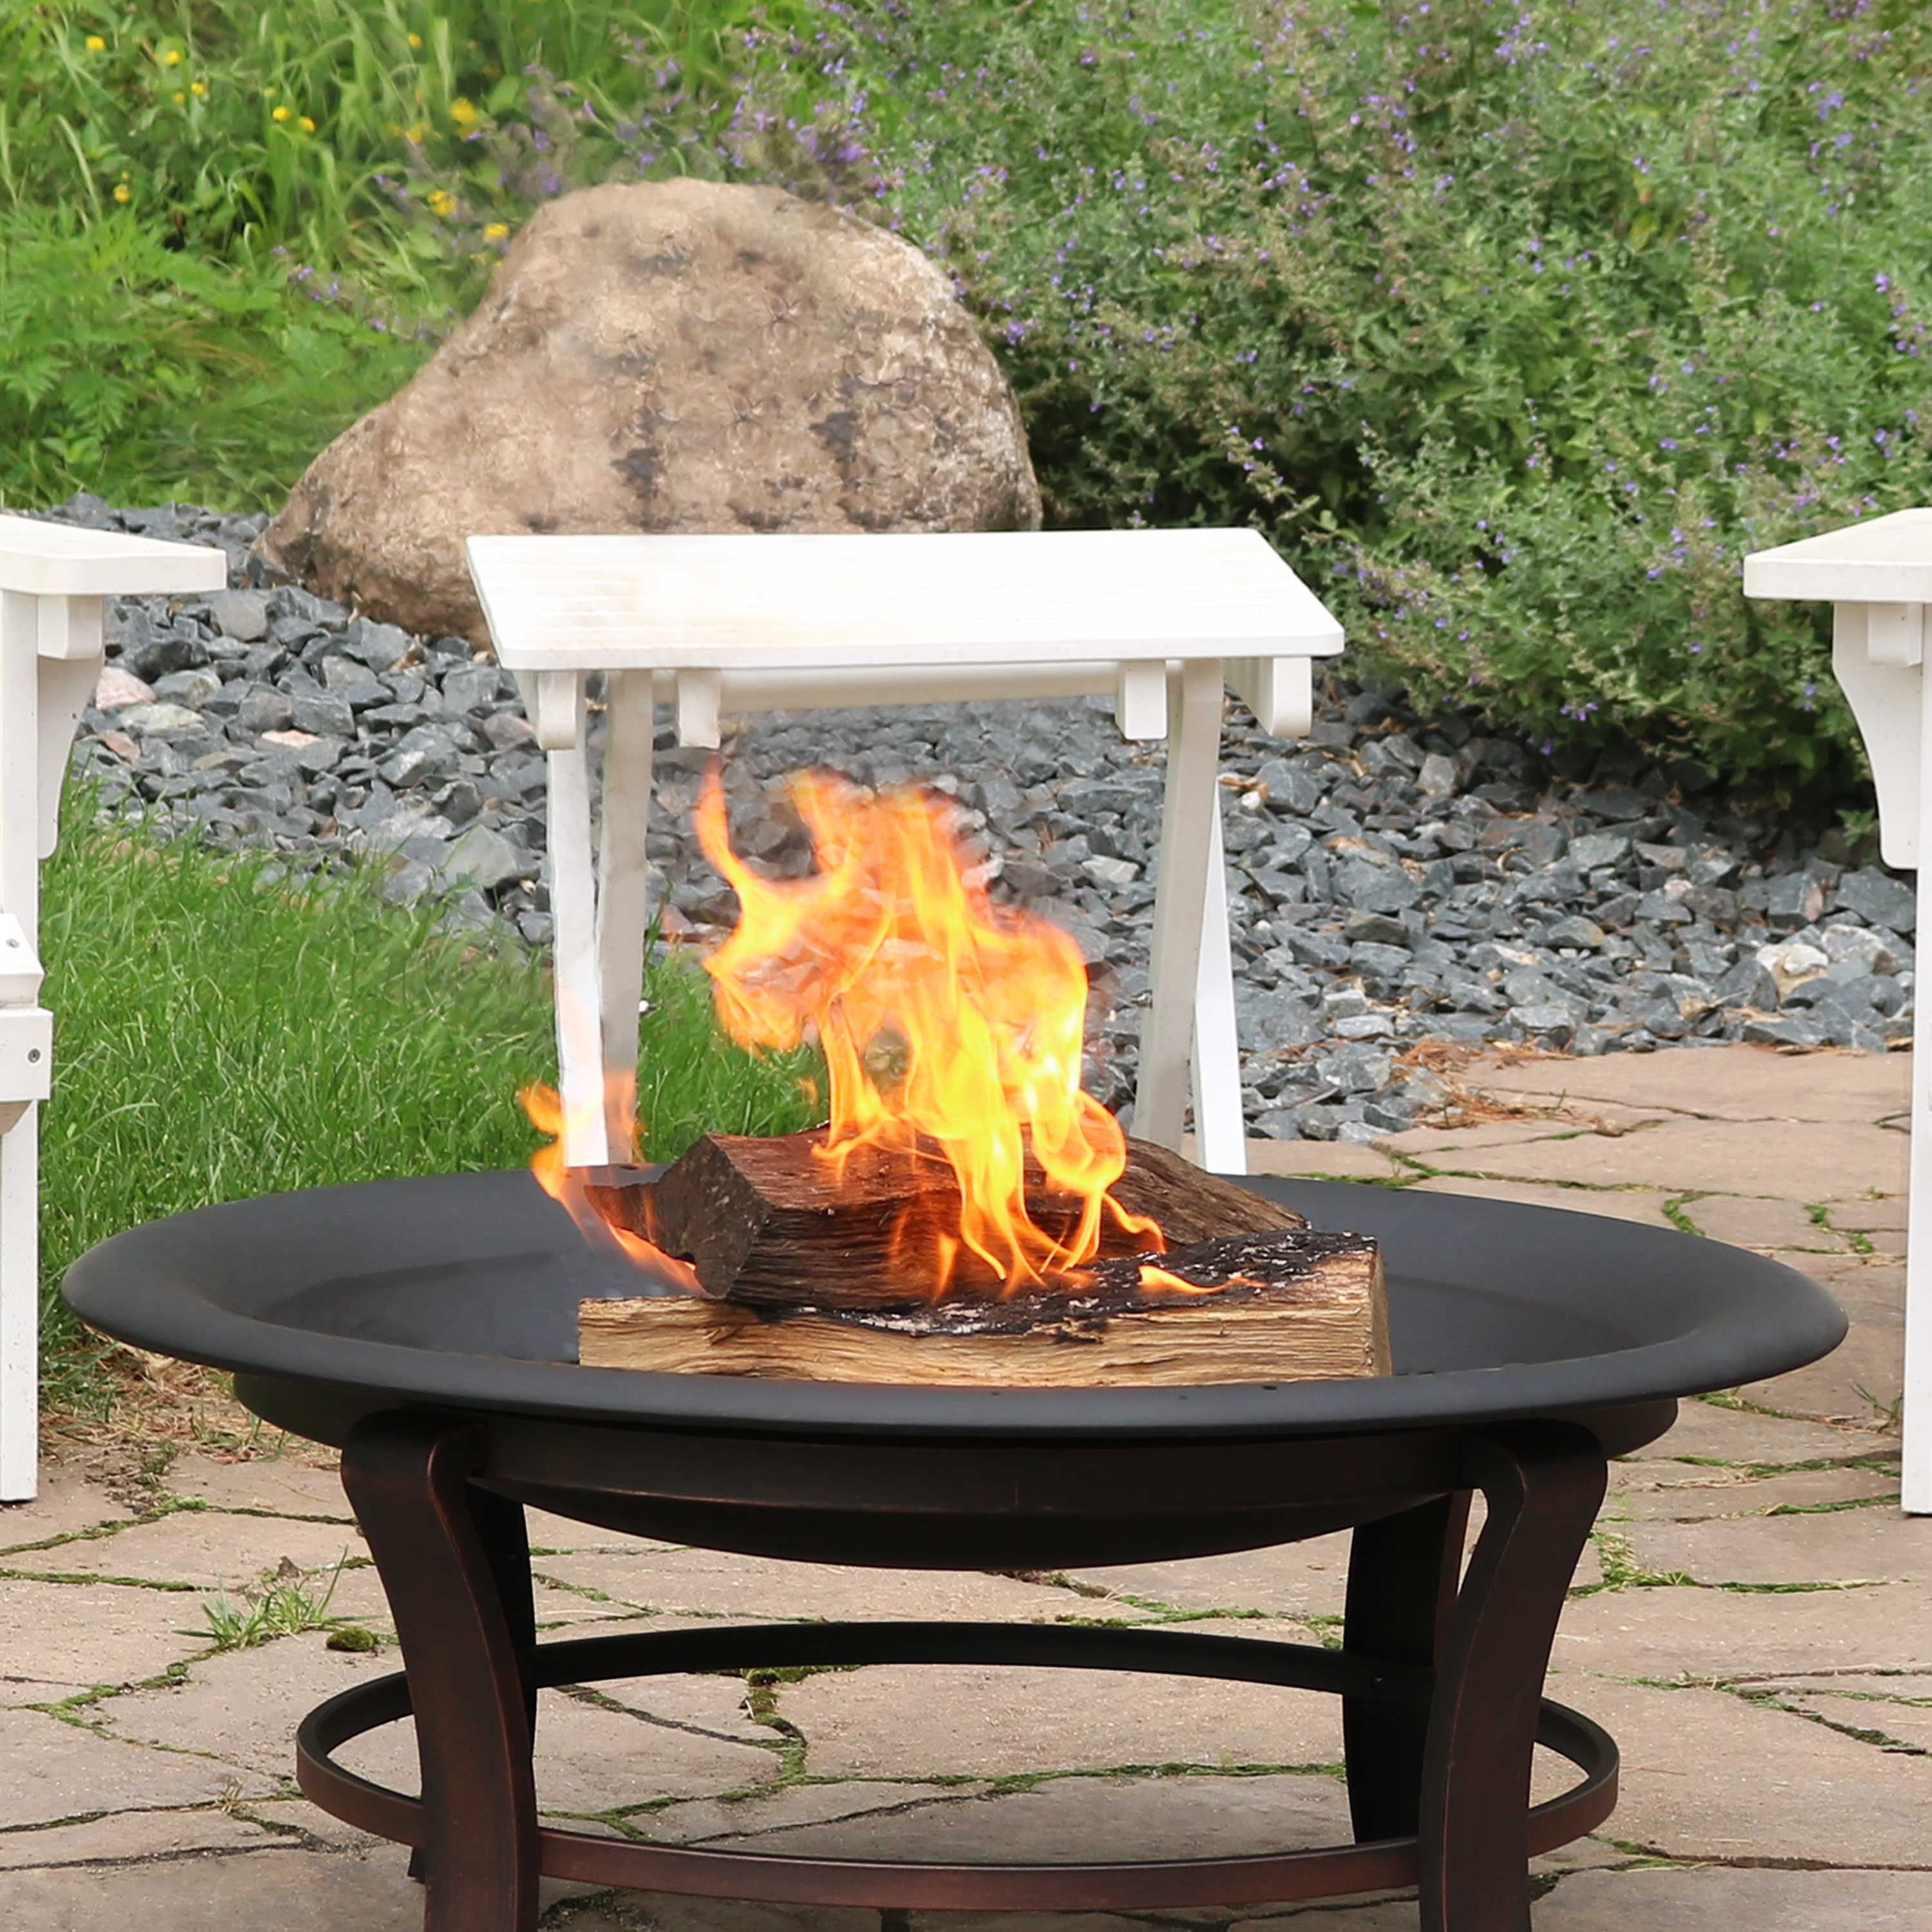 Sunnydaze Outdoor Replacement Fire Bowl for DIY or Existing Fire Pits